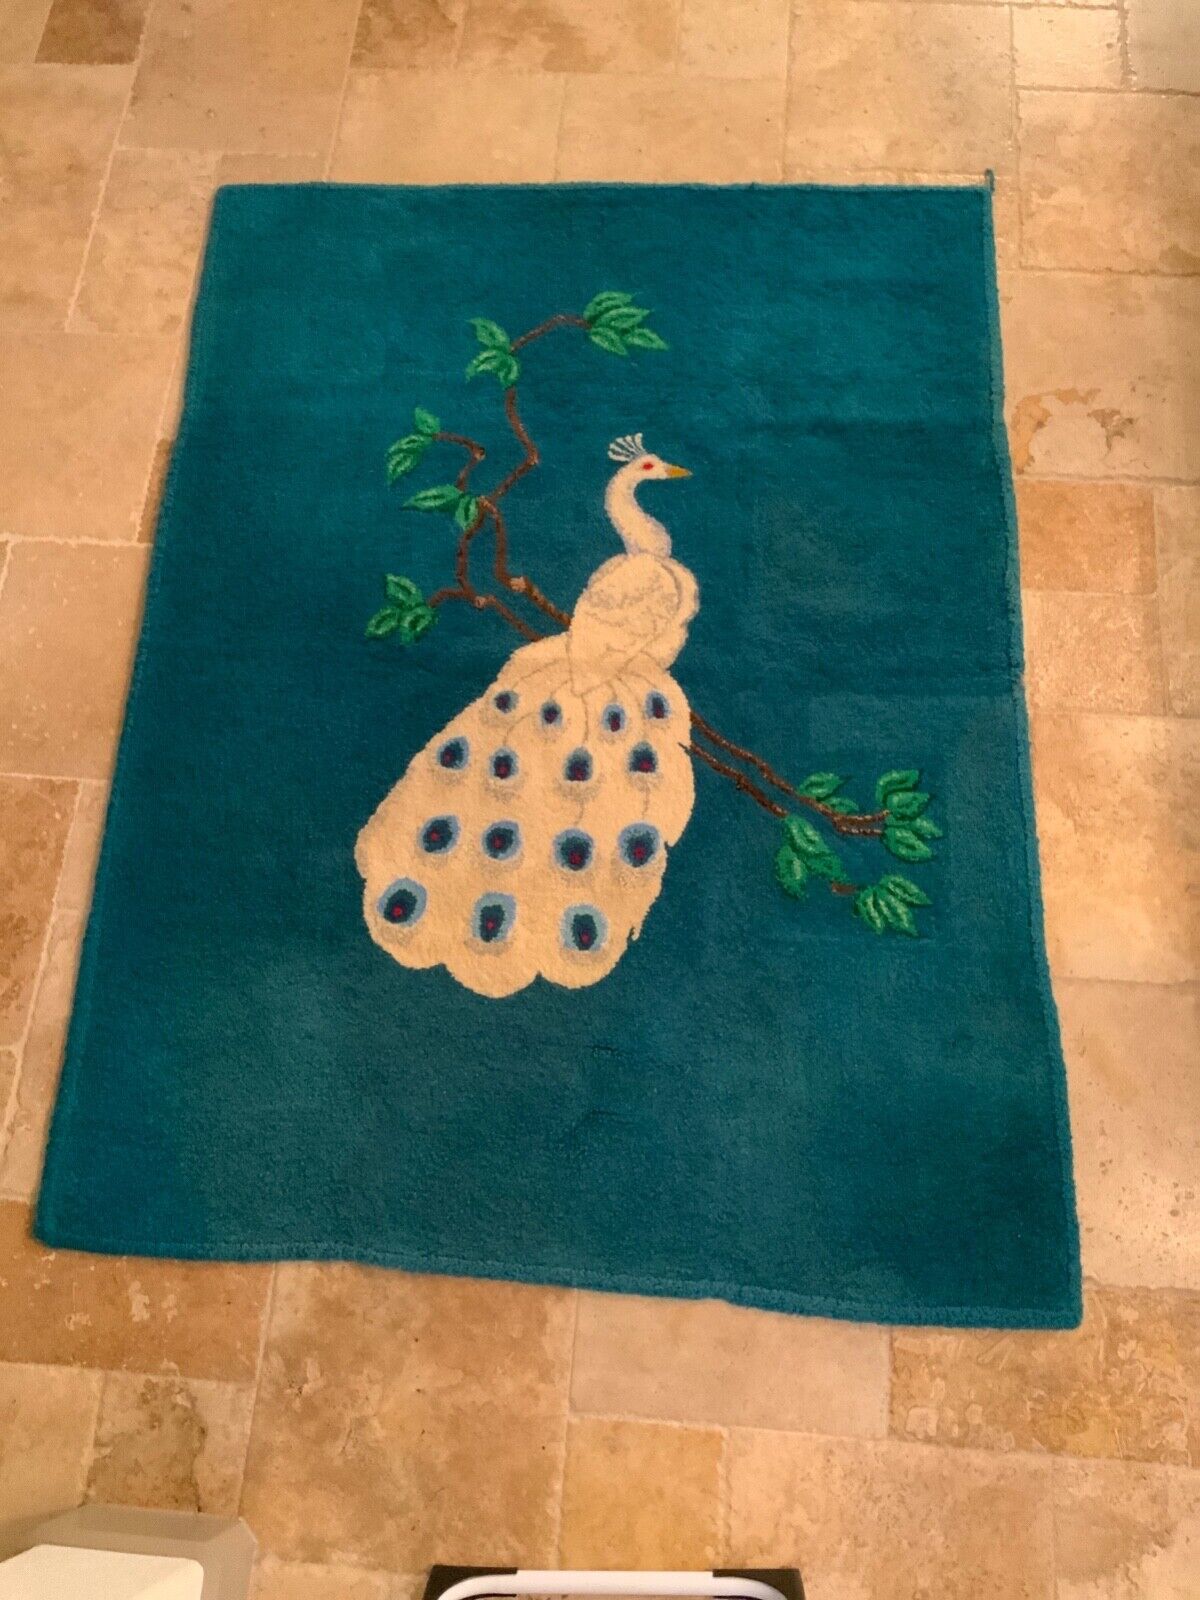 Huge 6’X 4 1/2’ Turquoise Peacock Rug/Wall Hanging with Rod Pocket